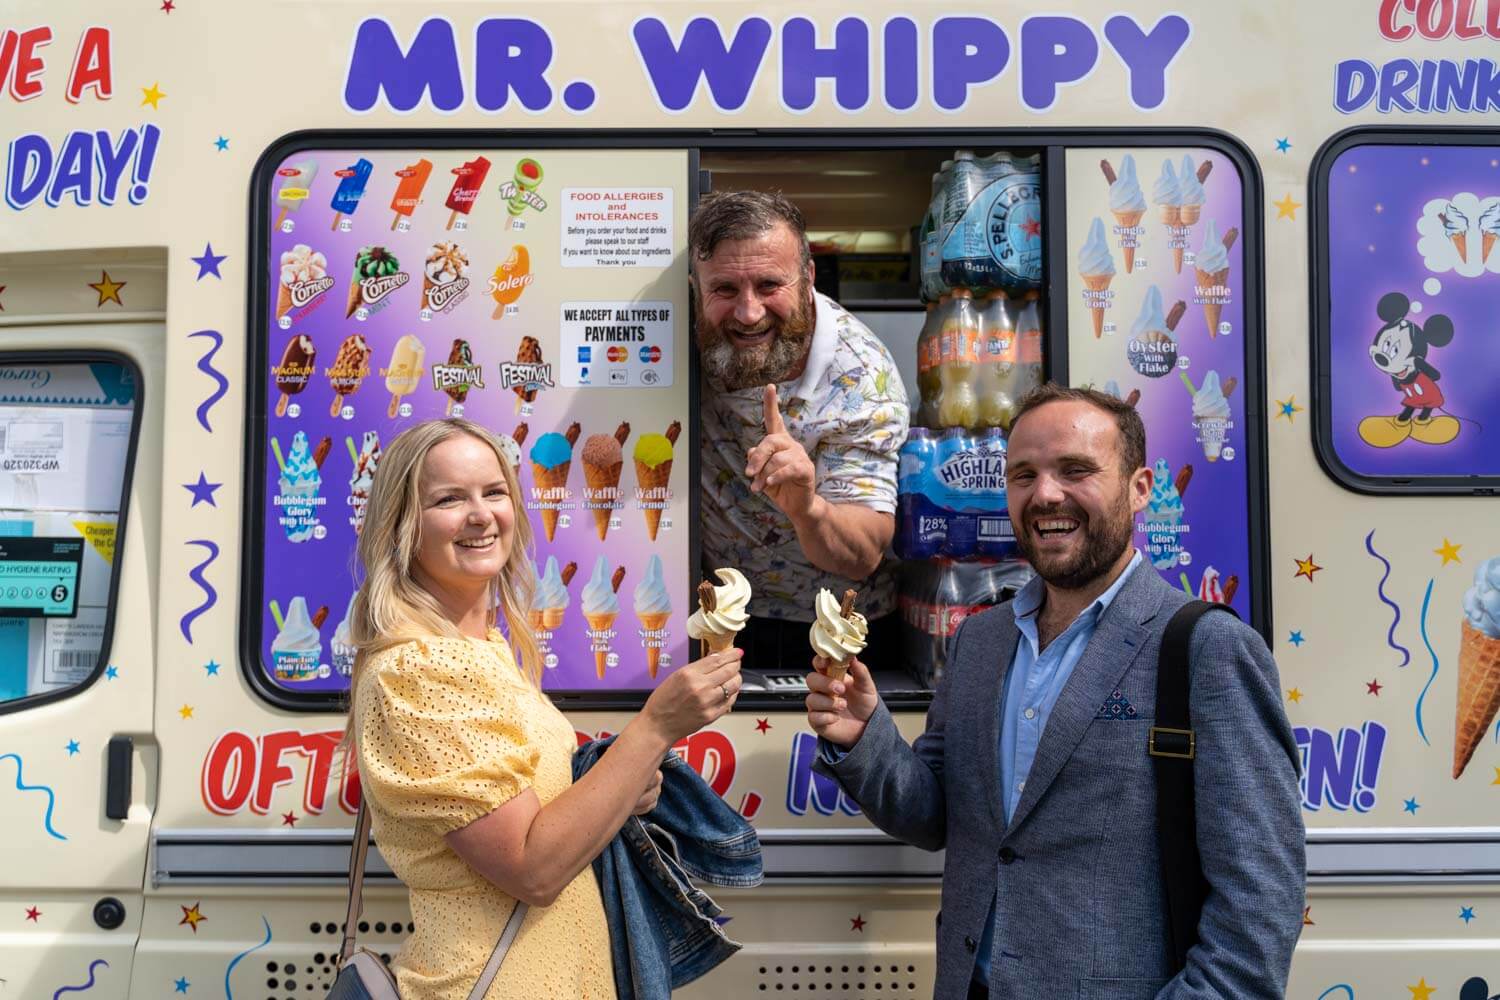 man and woman laugh as they hold their ice creams in front of the mr whippy van, the smiling ice cream seller holds up his index finger